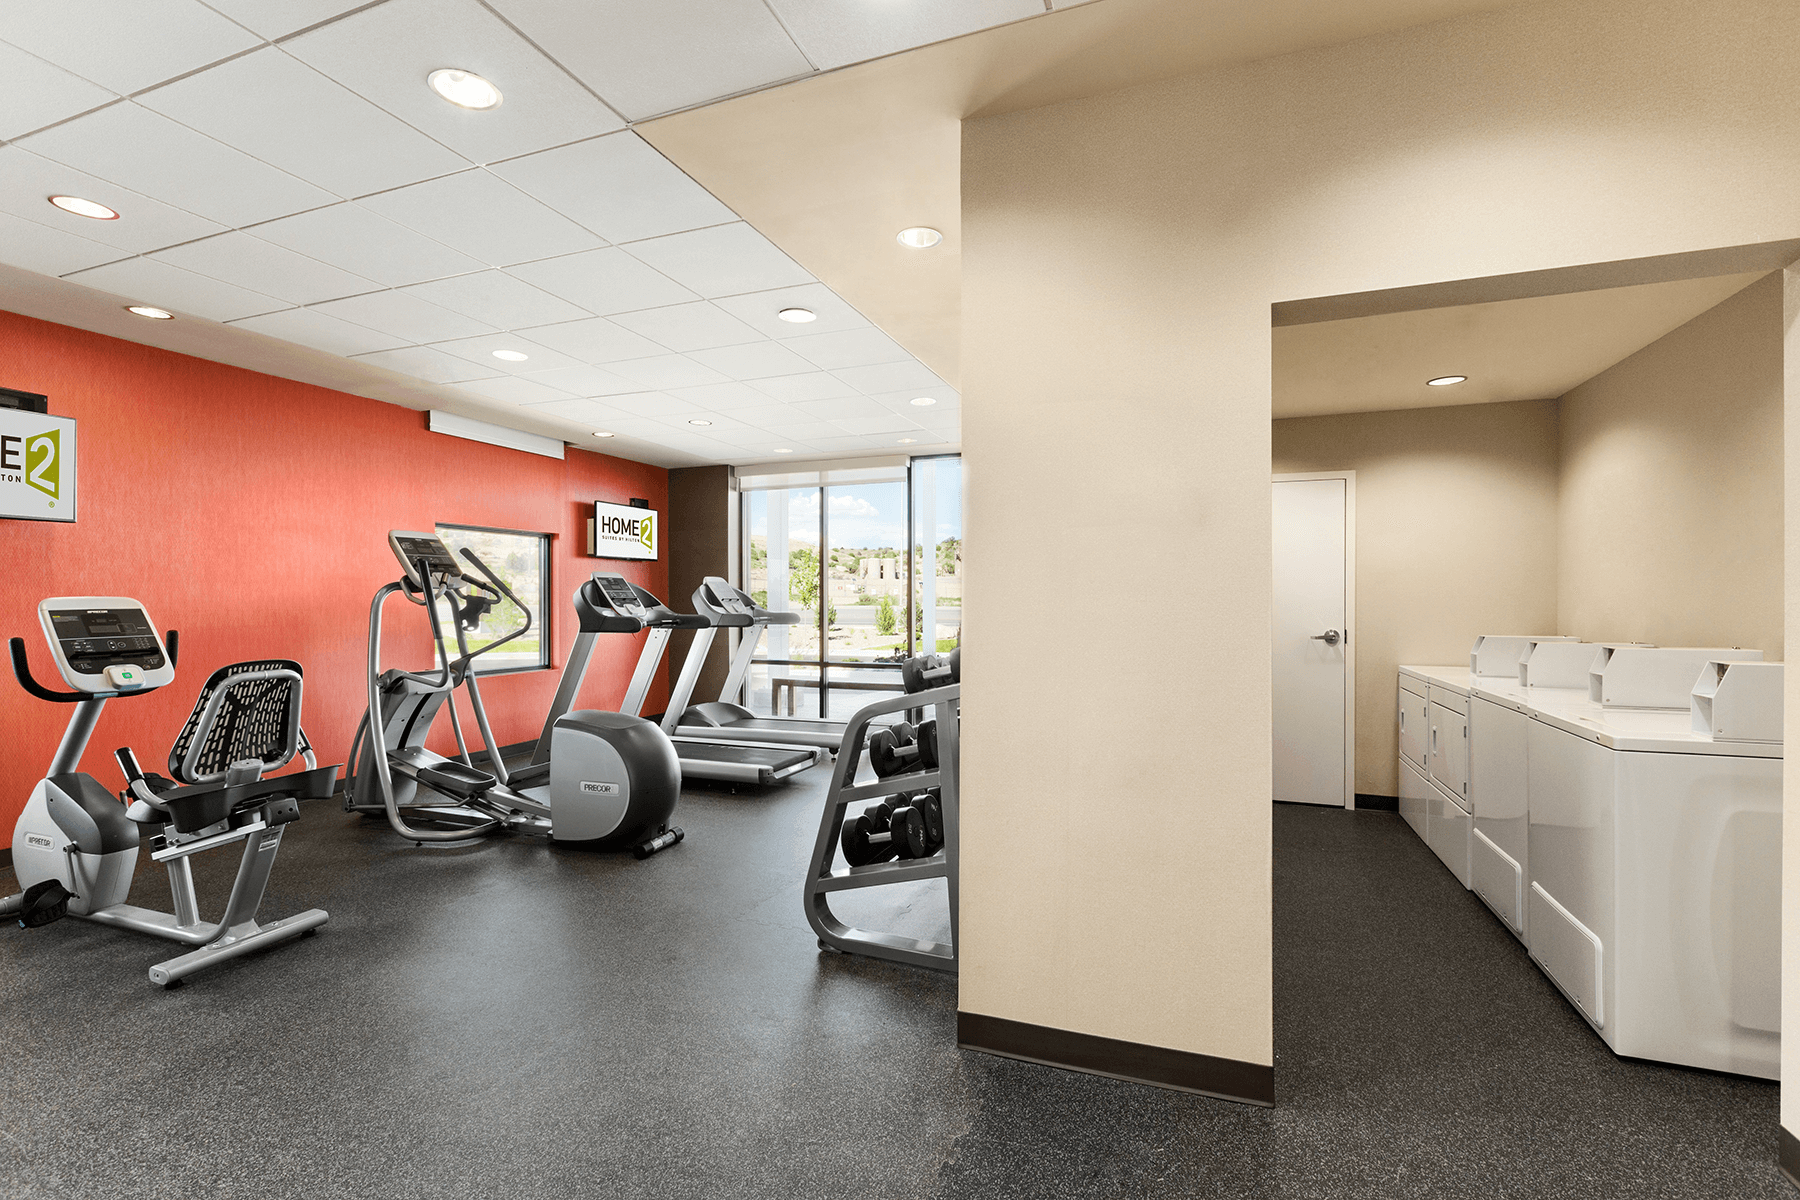  Home 2 Suites - Spin2 Cycle - fitness area interior 